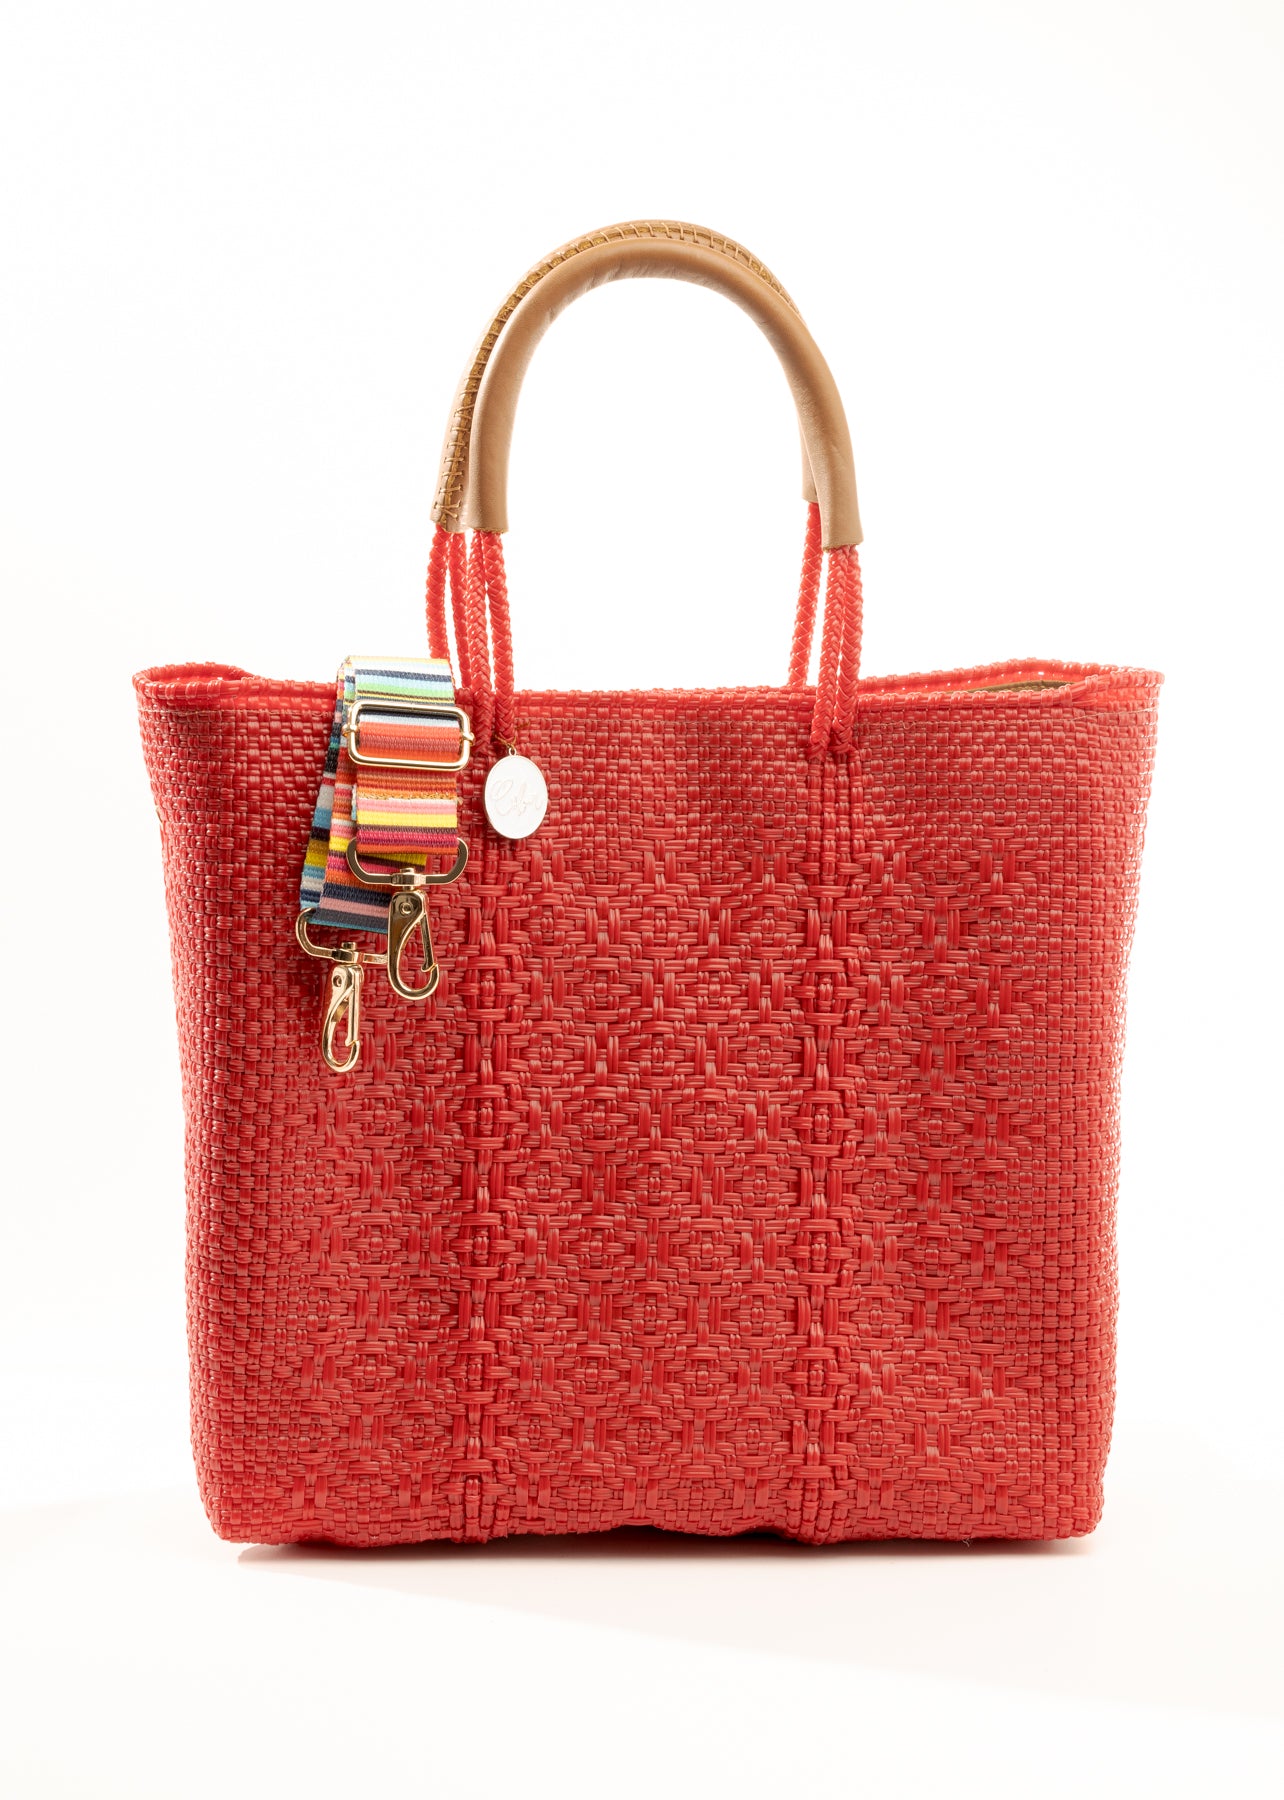 Red woven bucket bag made from recycled plastics with tan leather handle and silver Coba logo medallion and multi colored strap draped over the bag